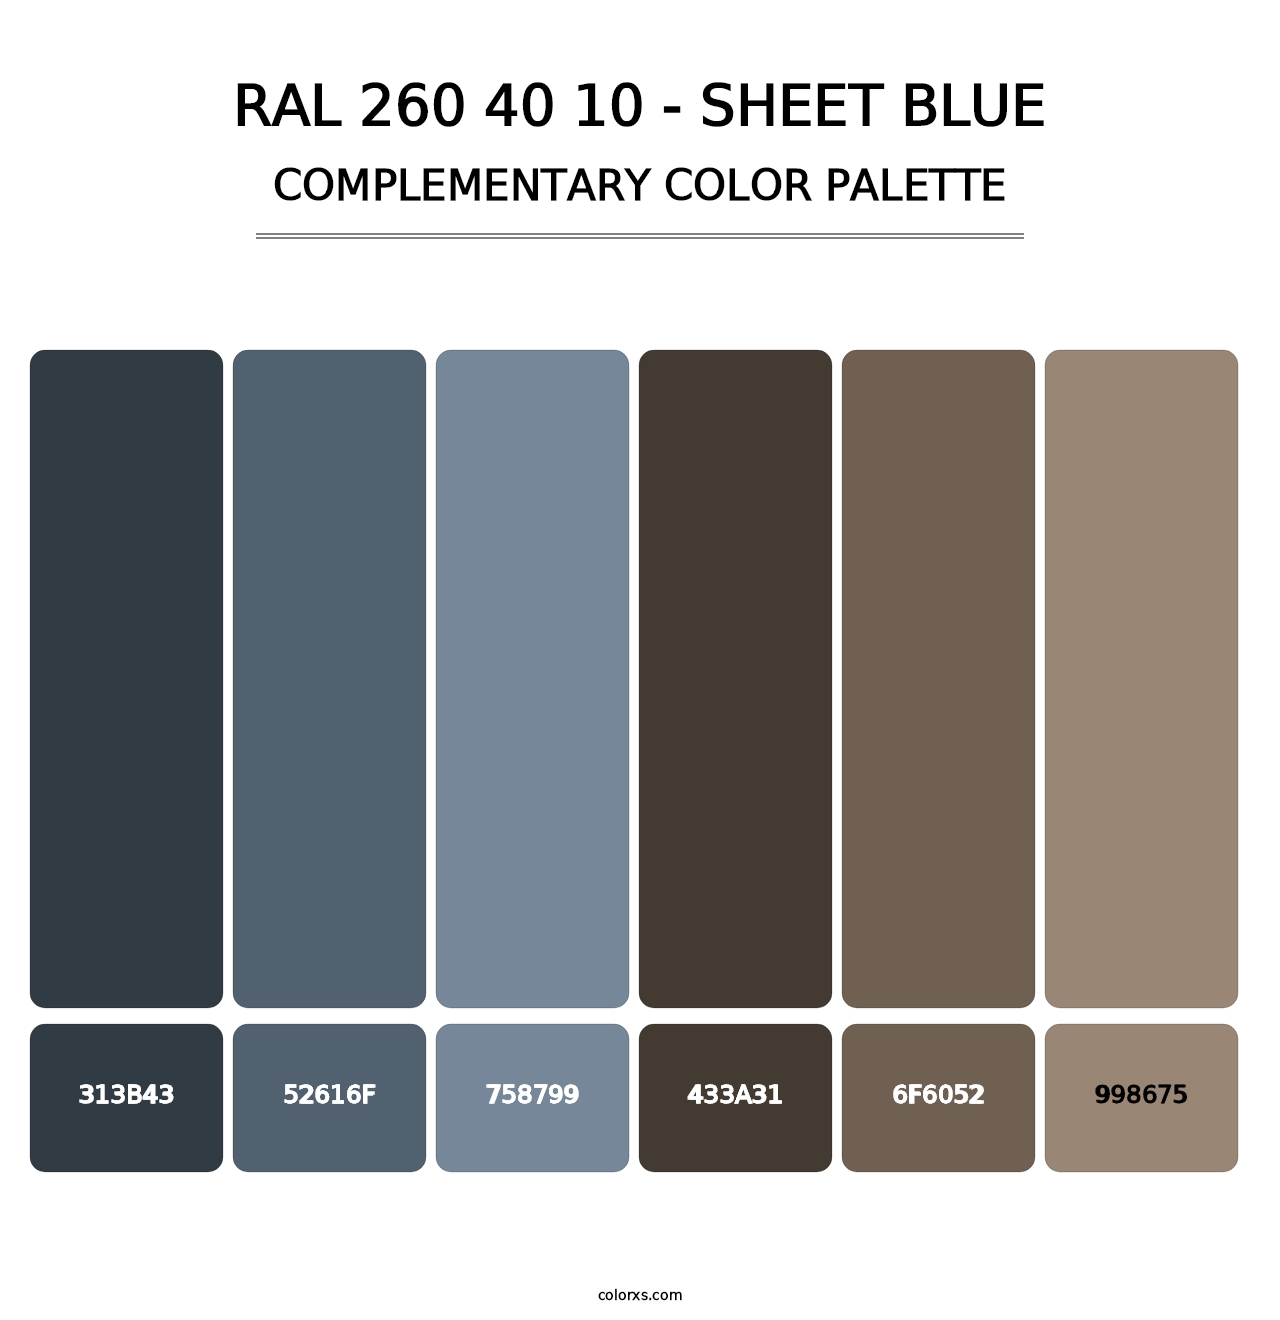 RAL 260 40 10 - Sheet Blue - Complementary Color Palette